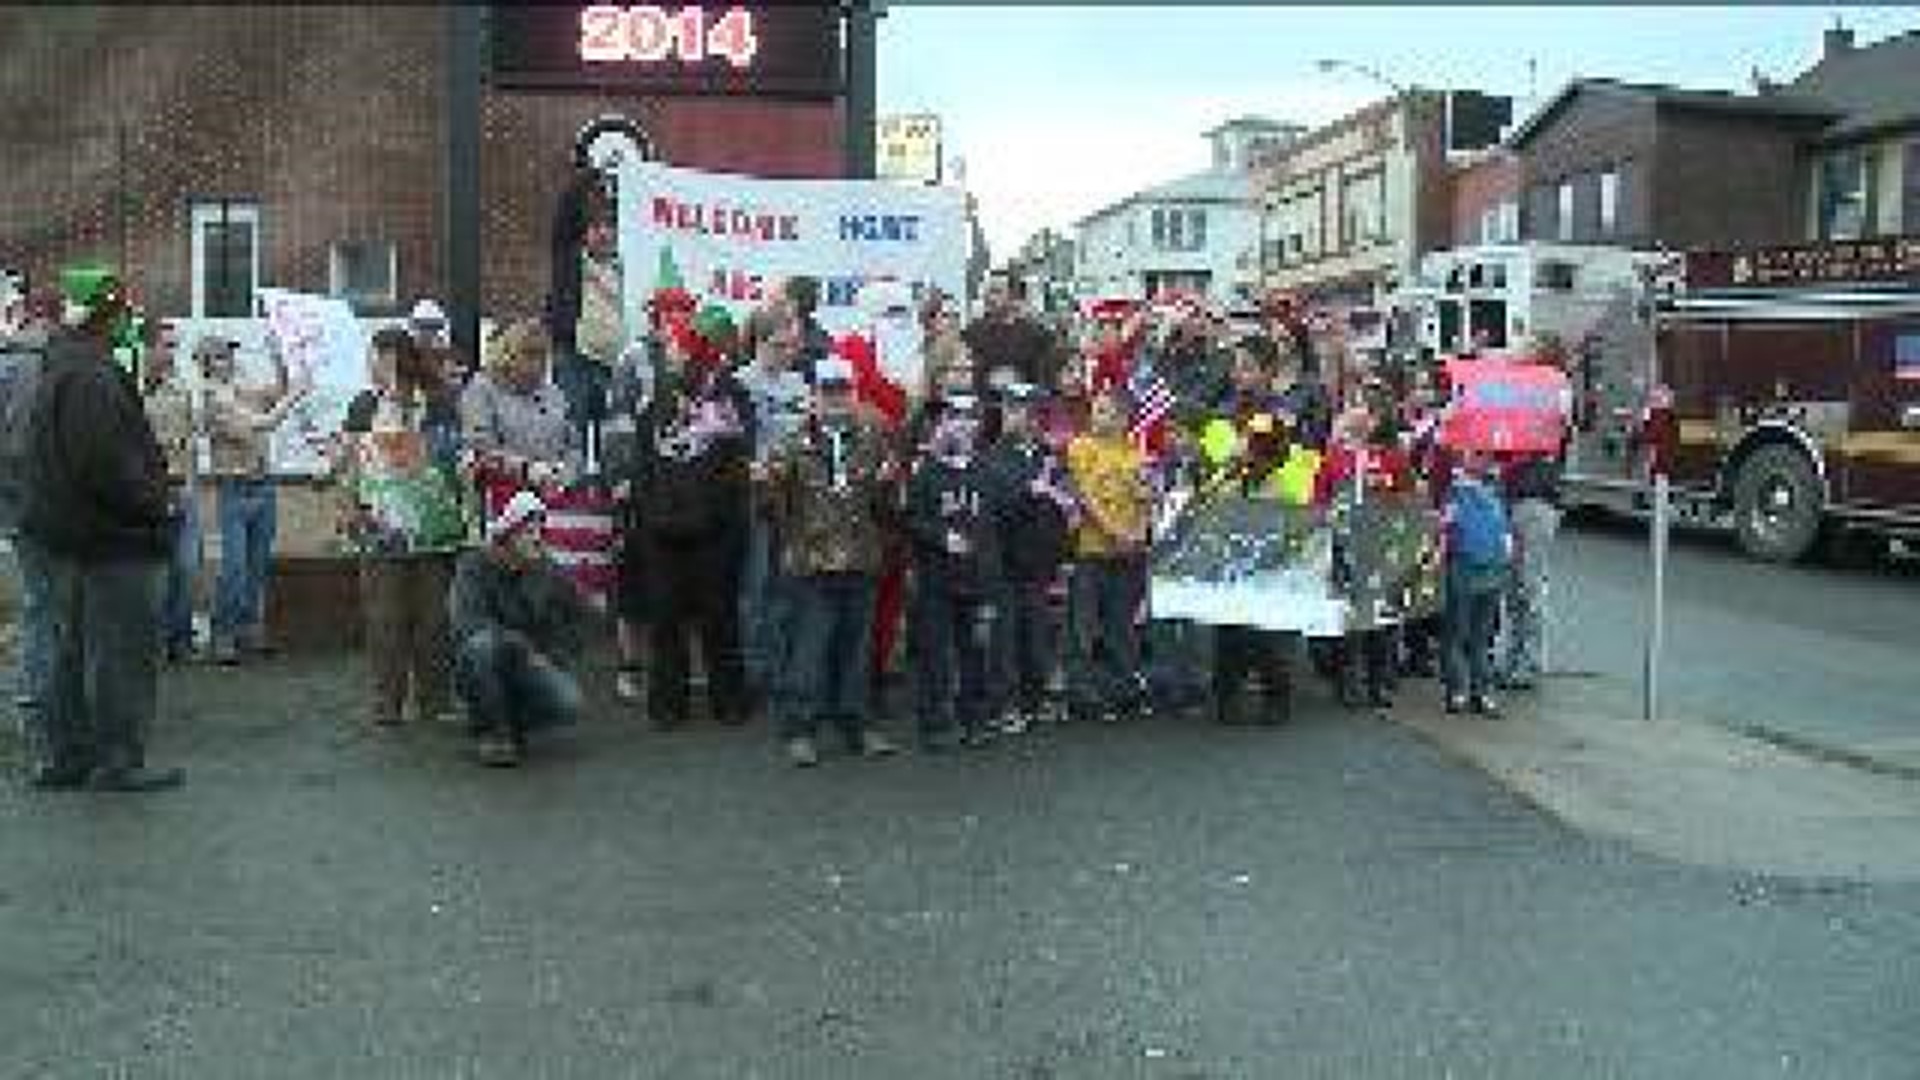 Soldier Returns Home to Warm Welcome